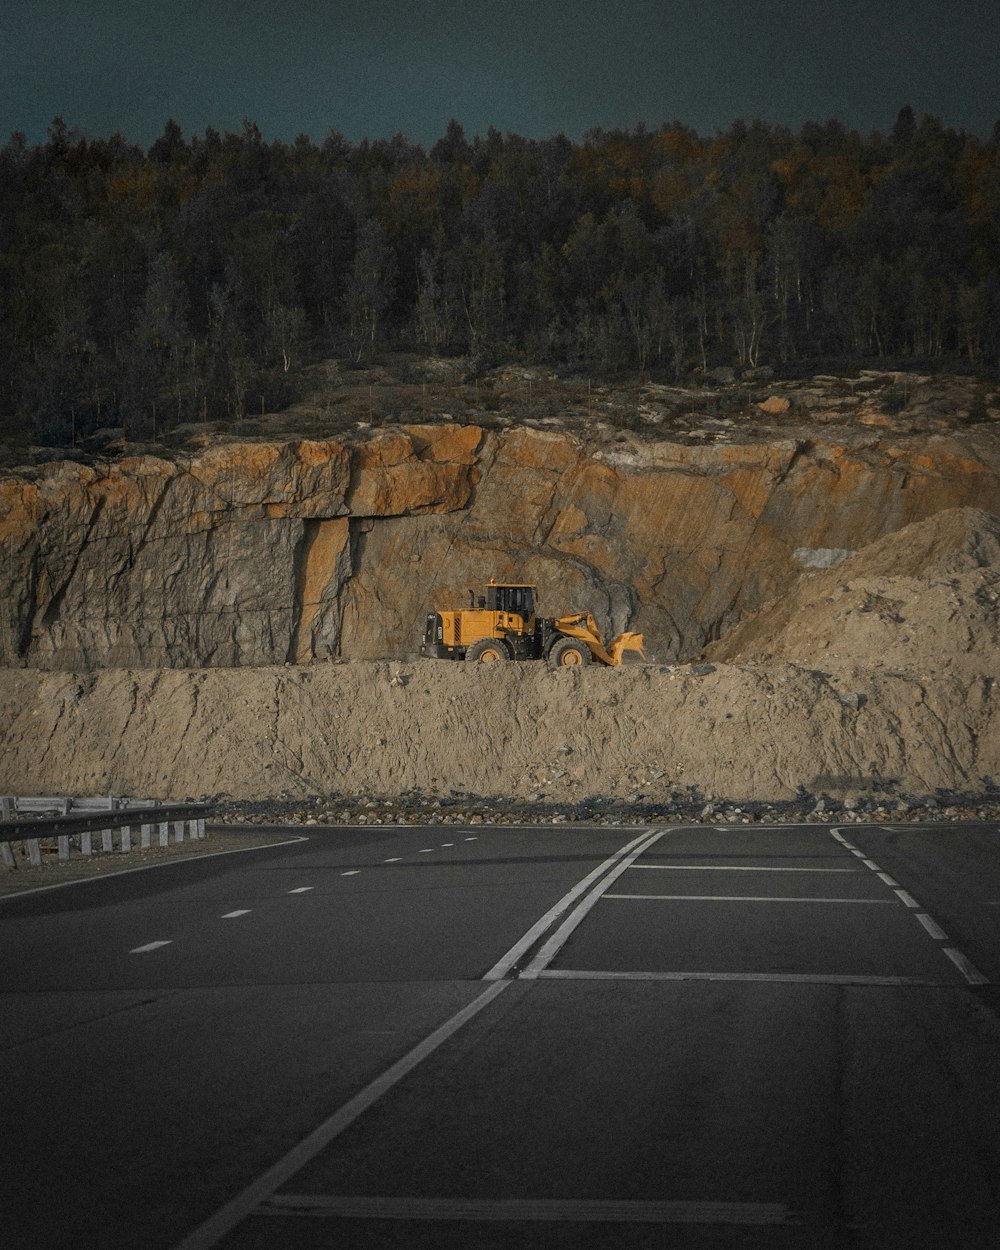 a construction vehicle on a road